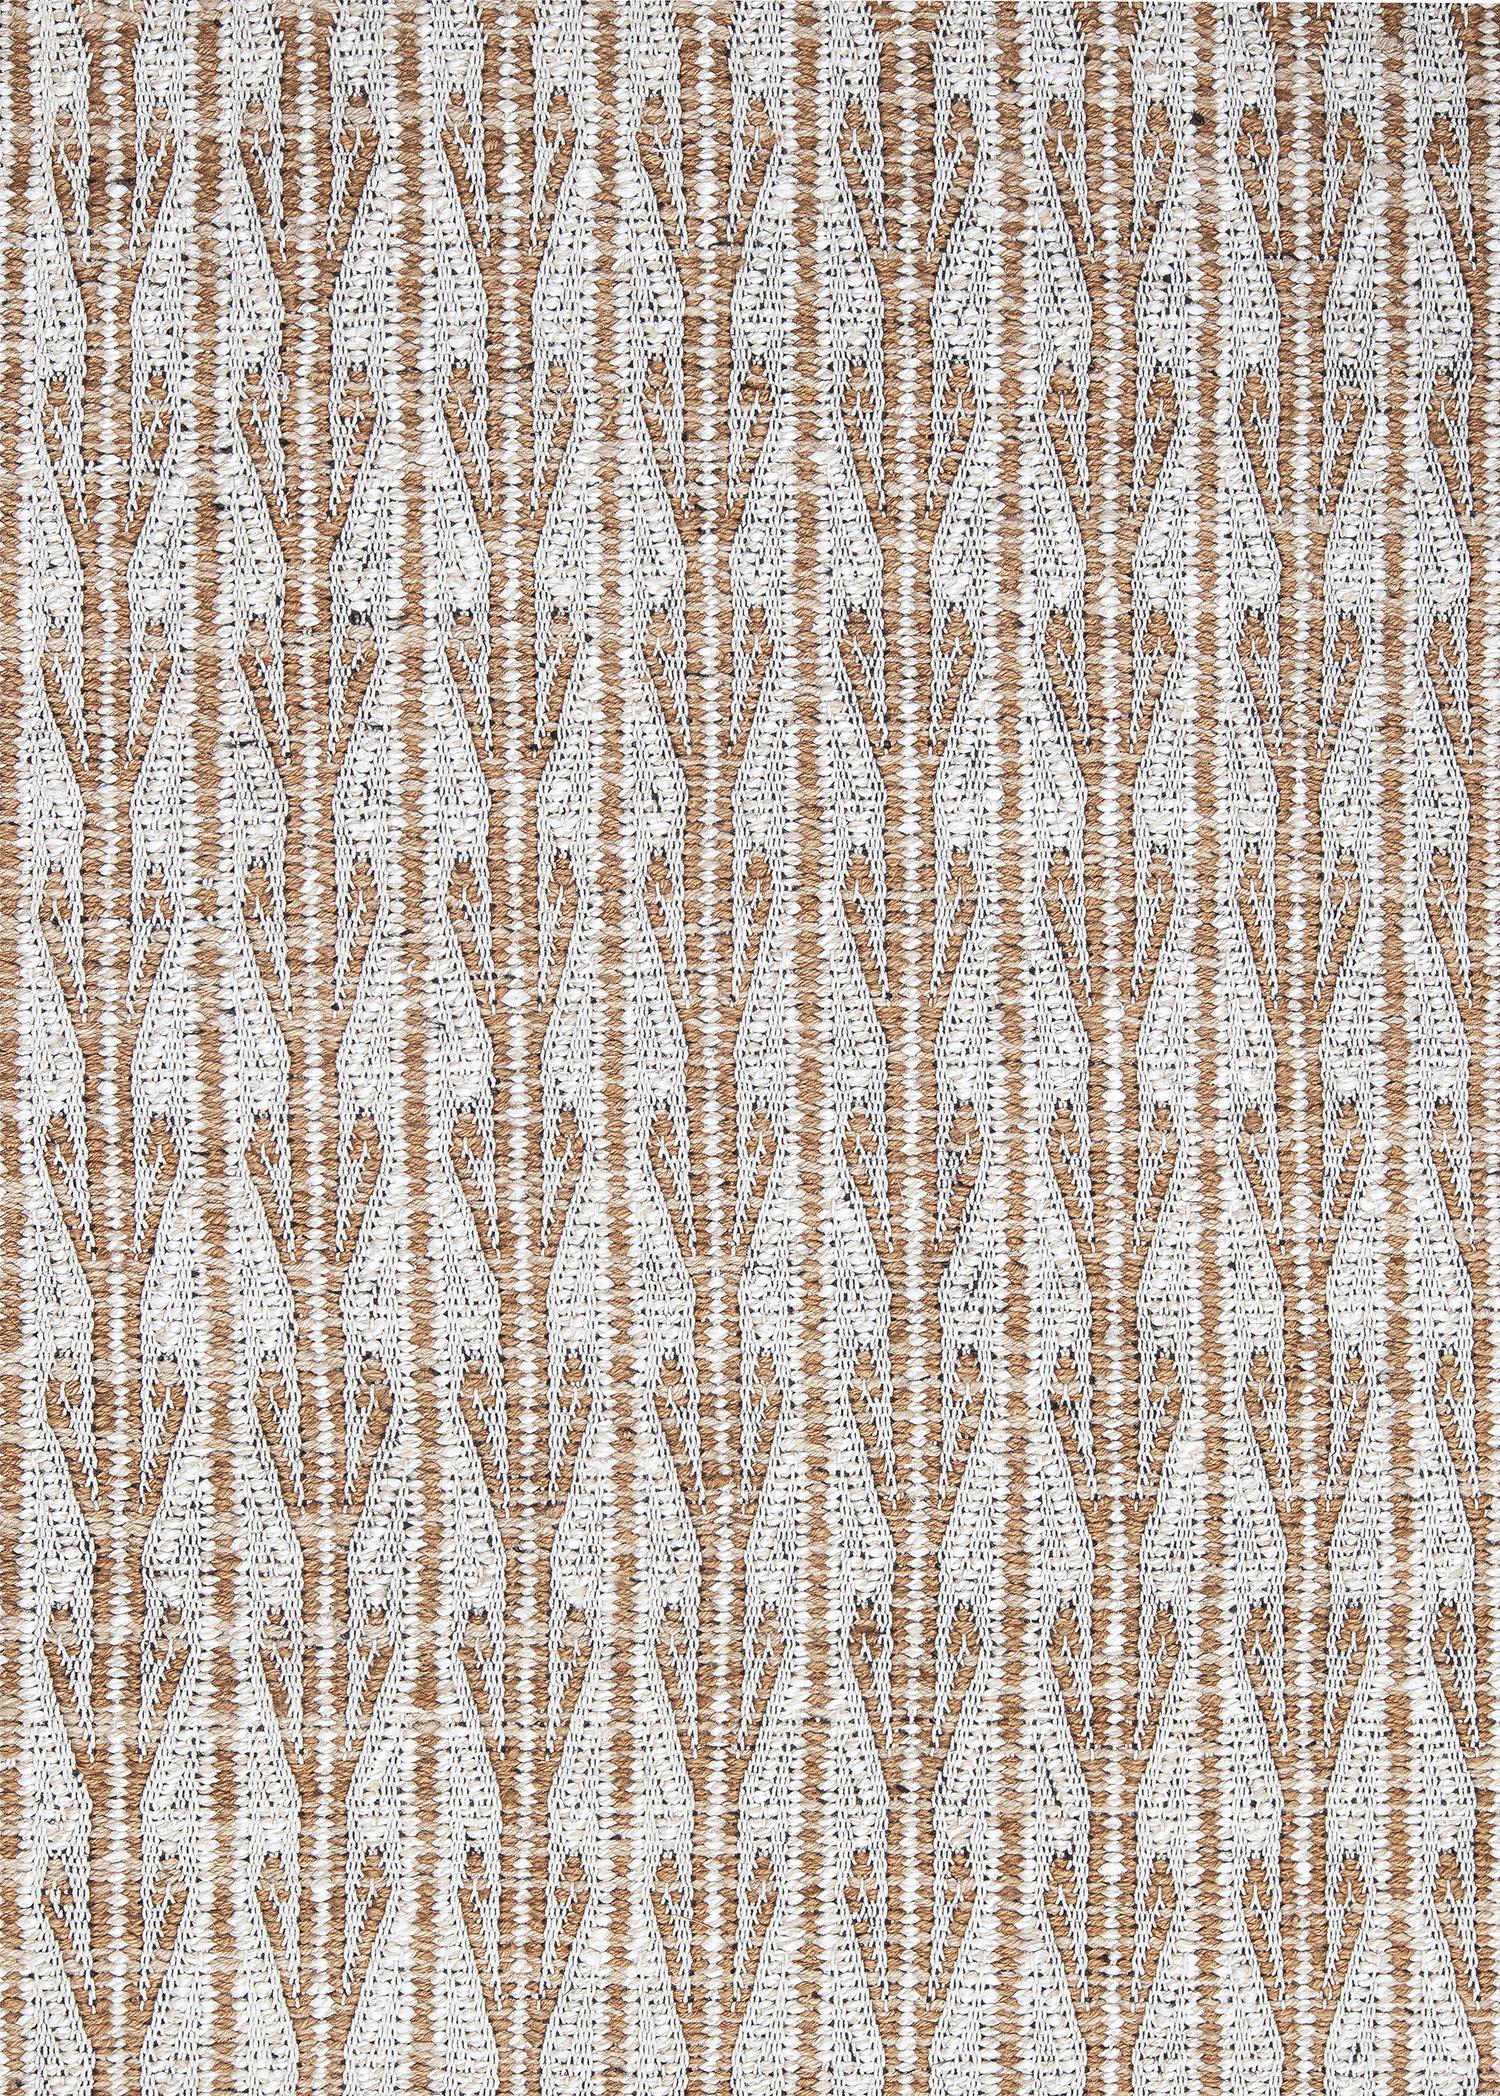 This Ricci flat-weave rug is made with 100% handspun, Persian wool and all-natural dyes. It is inspired by the Antique Persian kilims that are native to the Shiraz region in Iran. Nasiri continues their rich tradition of rug making by applying the